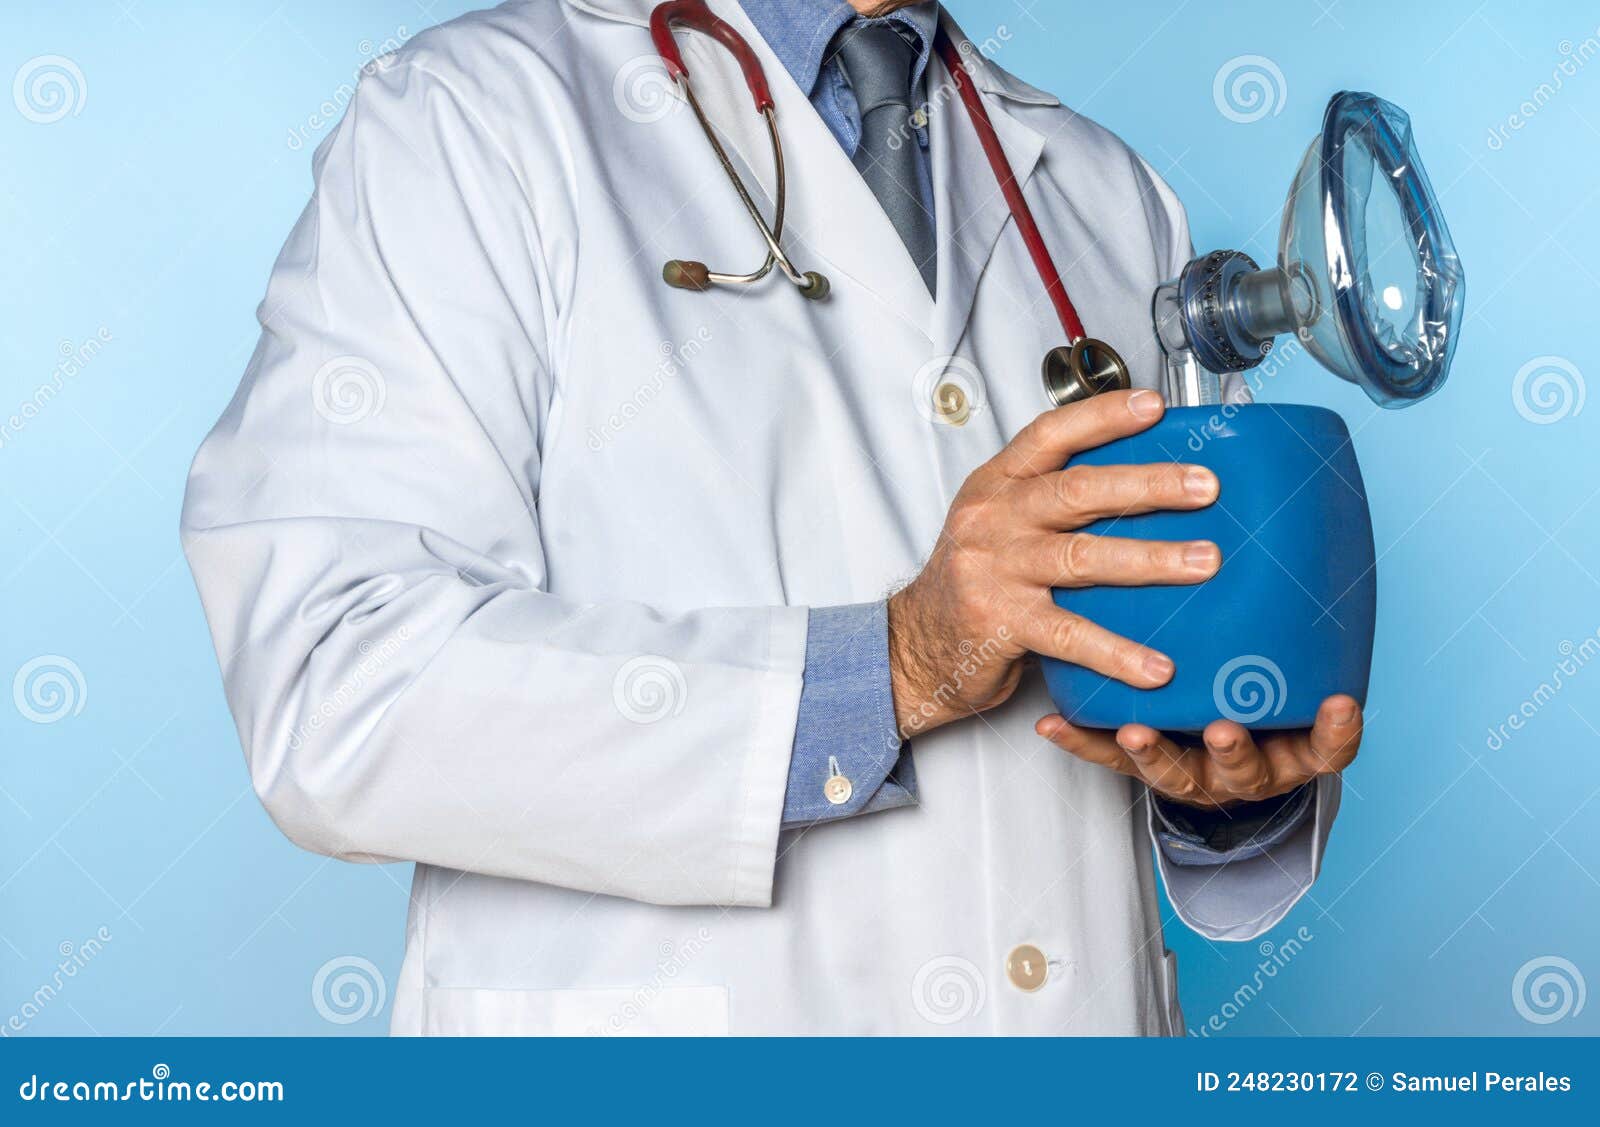 unrecognizable male doctor holding a hand-held resuscitator